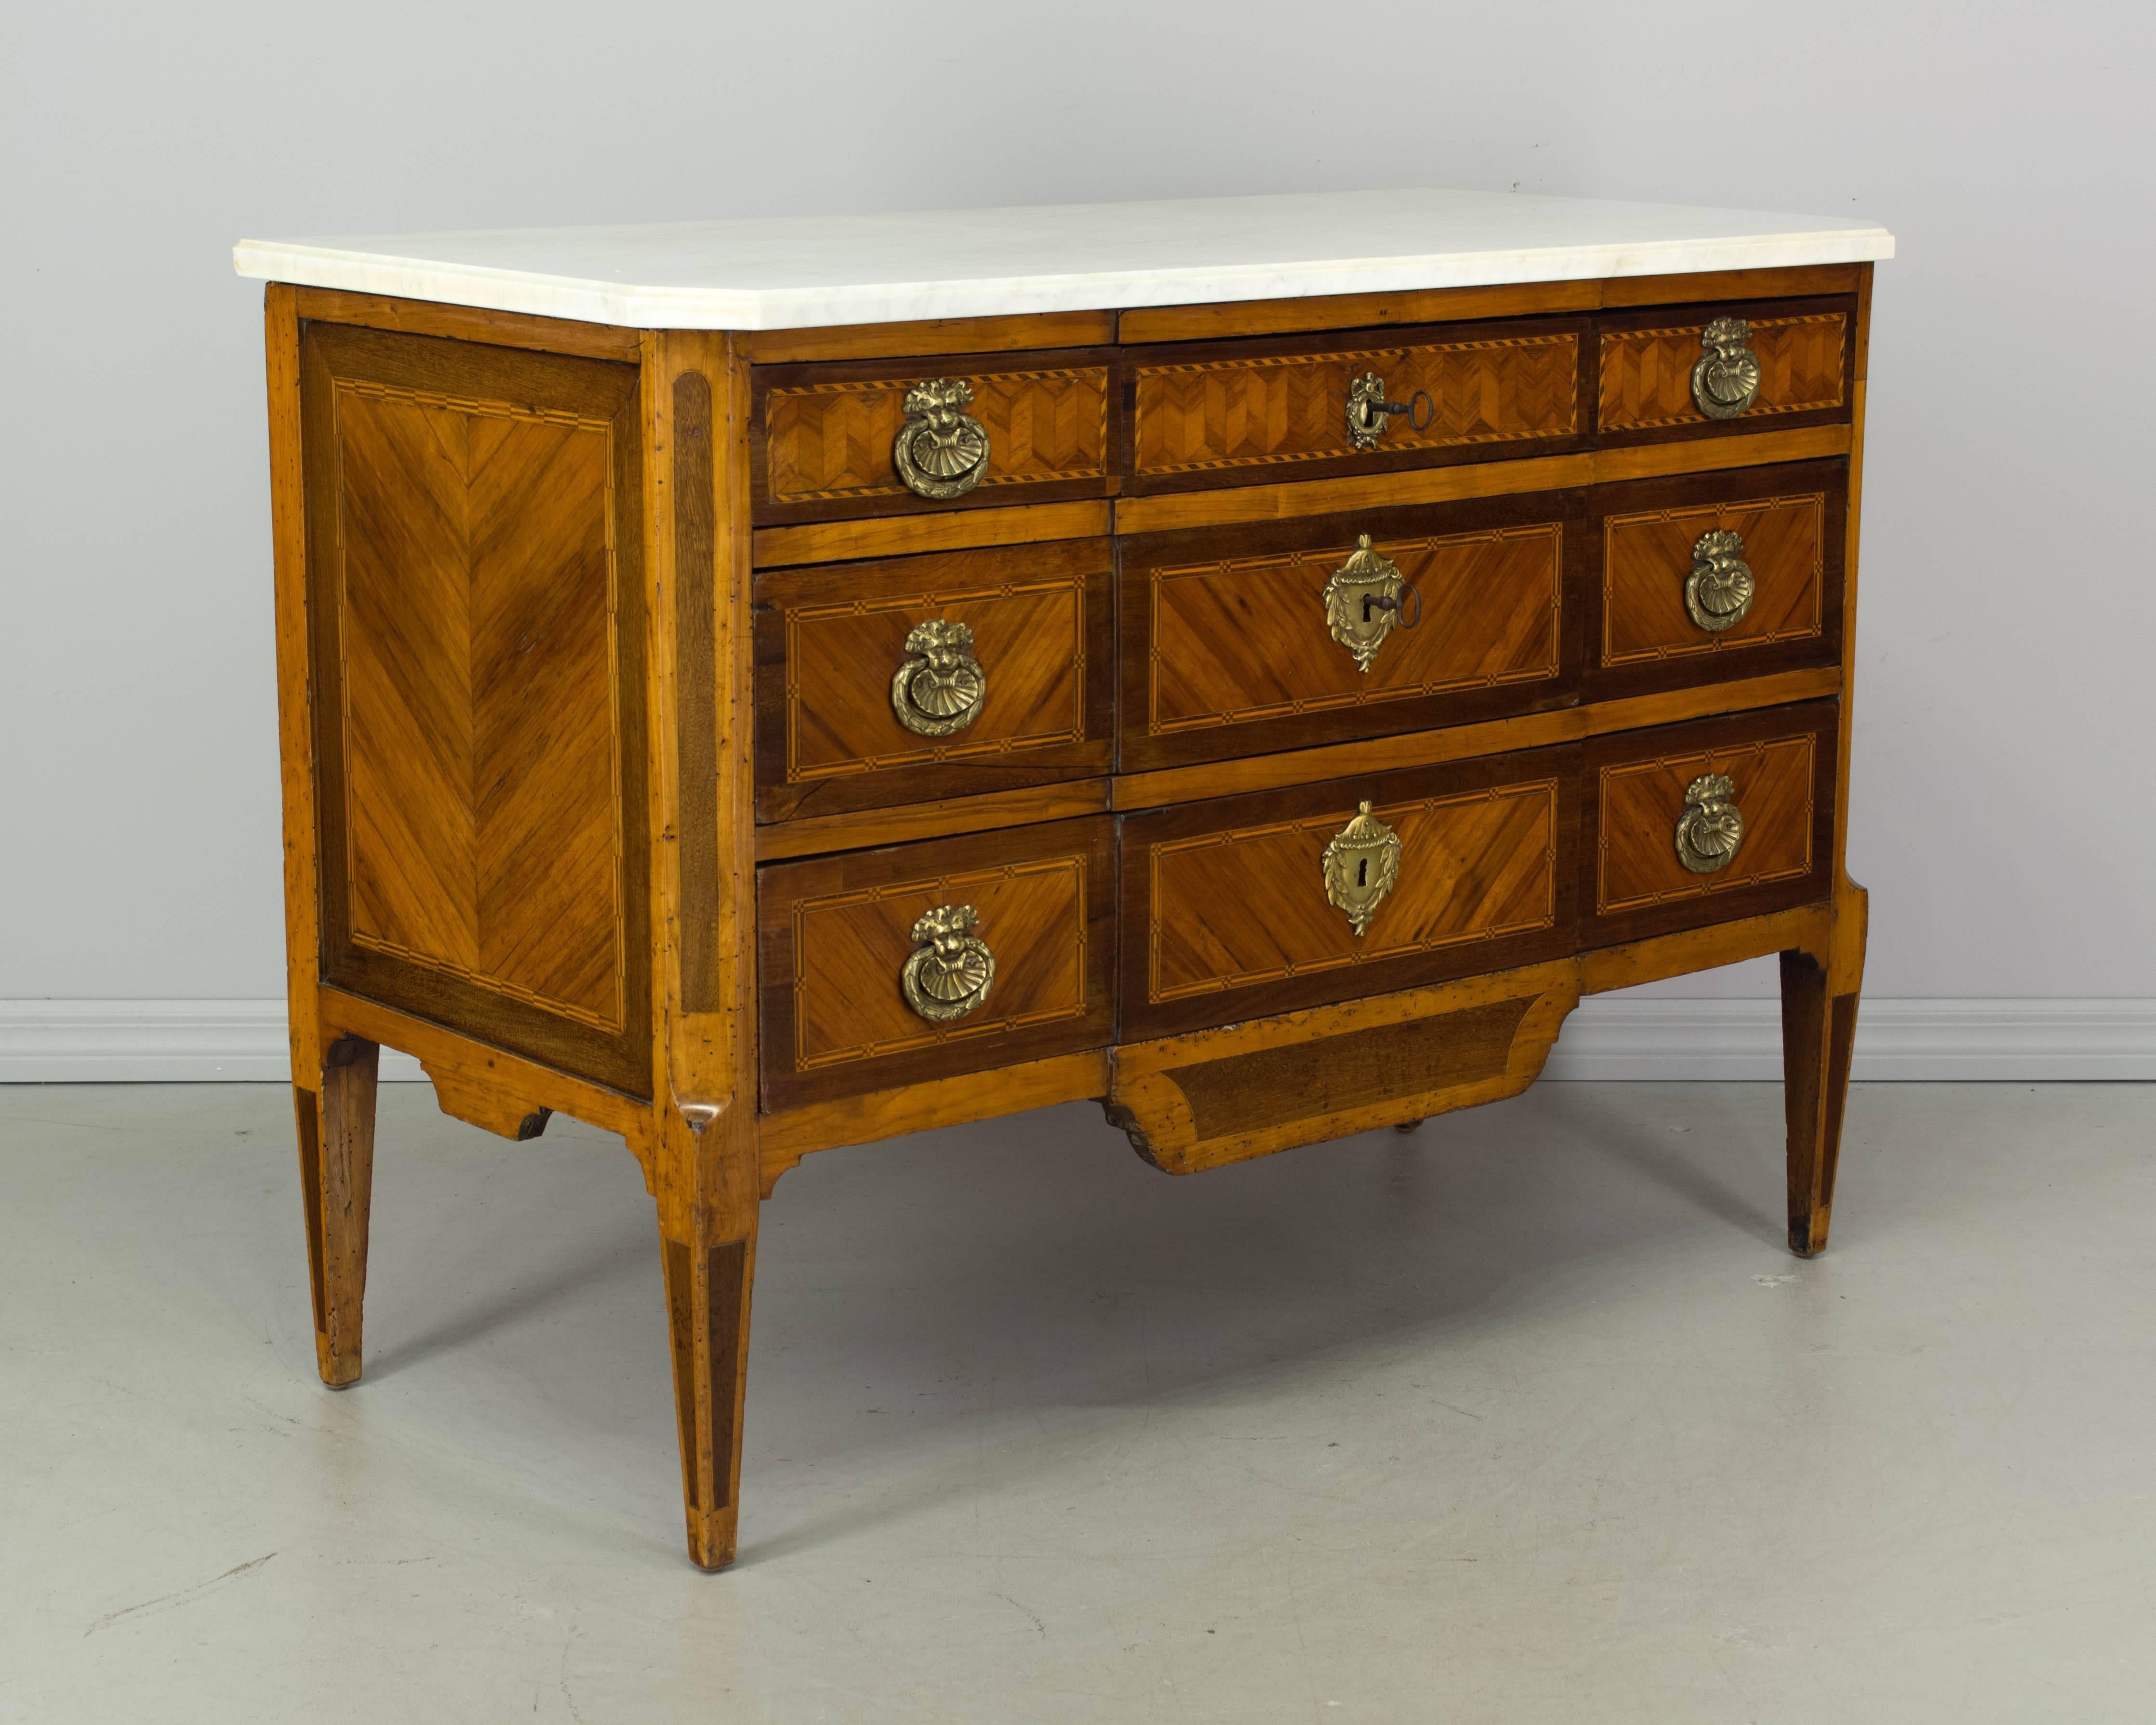 18th century French Louis XVI marquetry commode with veneers of mahogany, walnut and cherry. French polish finish. Pegged construction with mortise and tenon joints. Five dovetailed drawers with original bronze hardware. Locks are in working order